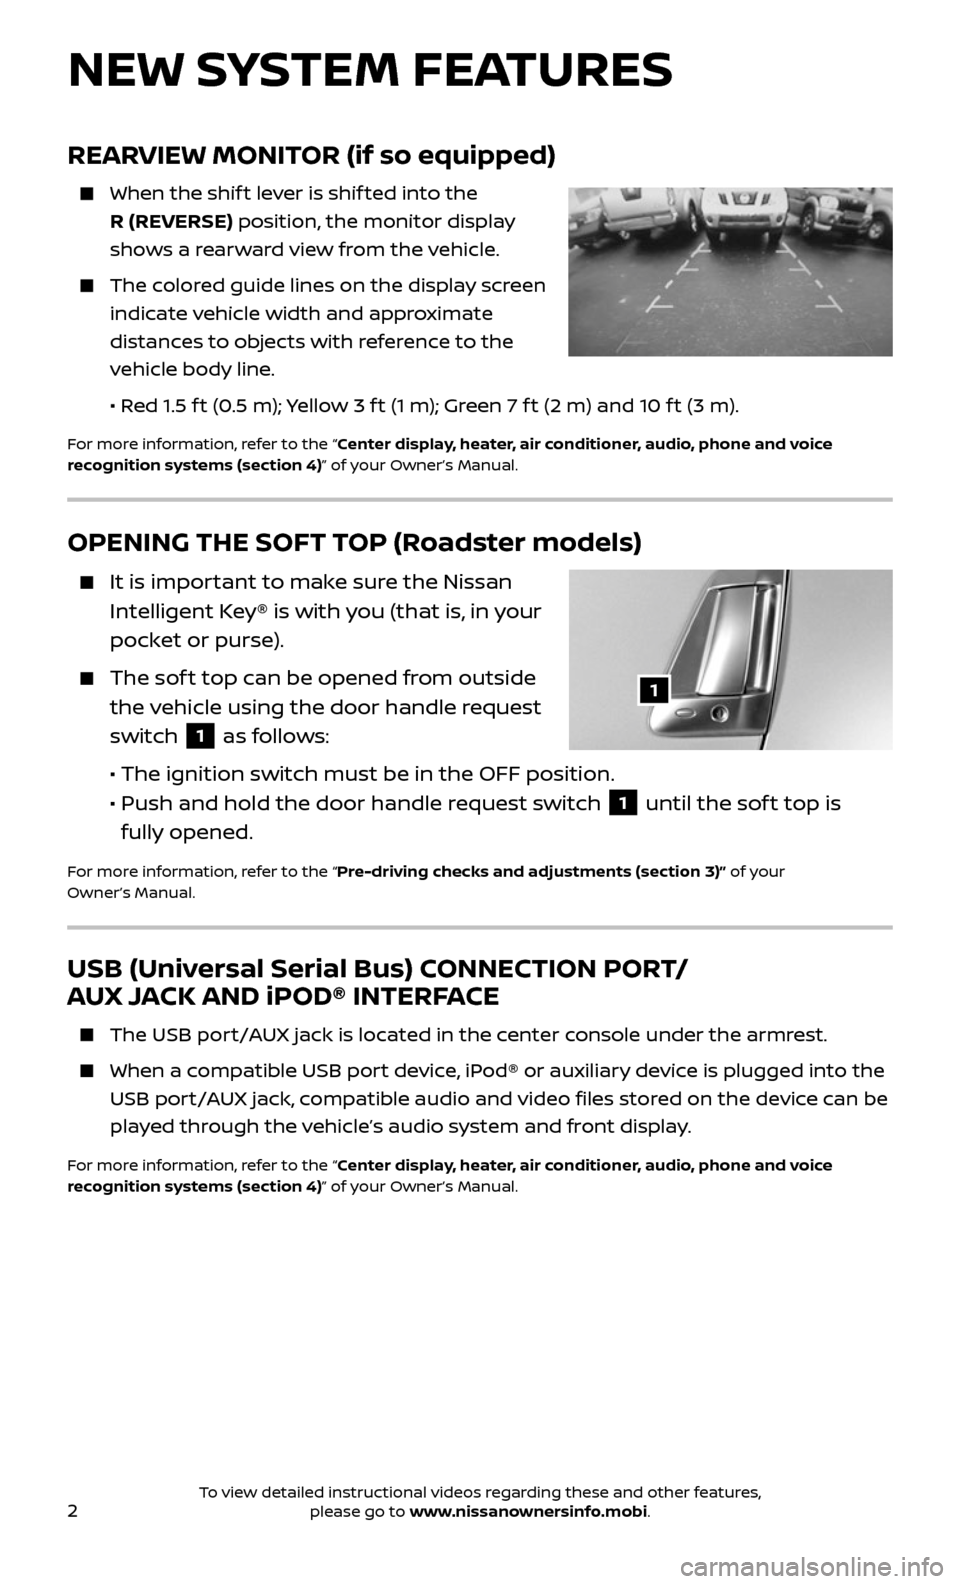 NISSAN 370Z COUPE 2017 Z34 Quick Reference Guide 2
OPENING THE SOFT TOP (Roadster models)
    It is important to make sure the Nissan 
Intelligent Key® is with you (that is, in your 
pocket or purse).
    The soft top can be opened from outside 
th